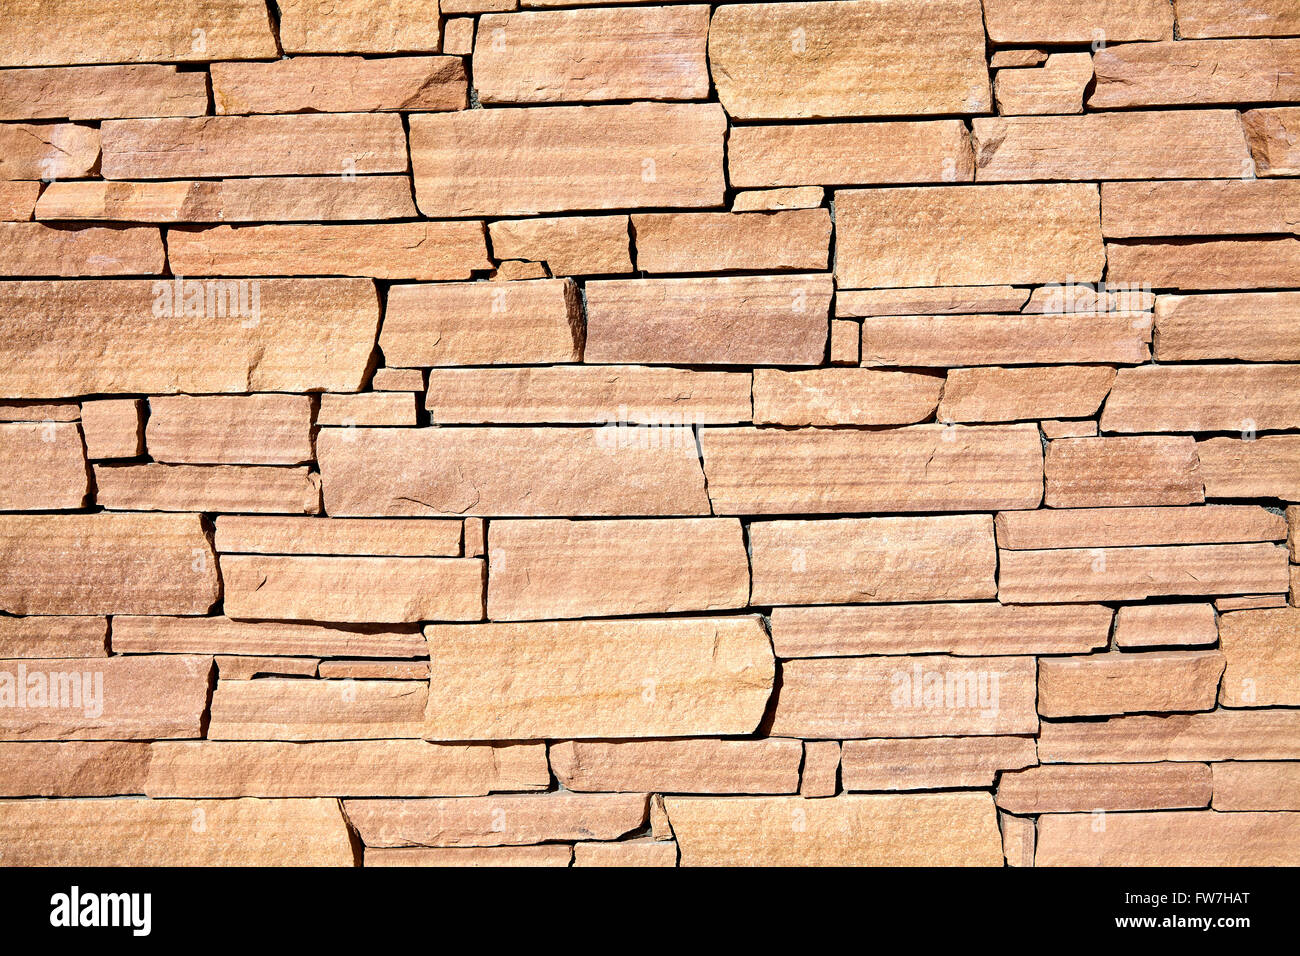 stone natural rock veneer wall and building finish design and pattern closeup for construction industry and manufacturing Stock Photo